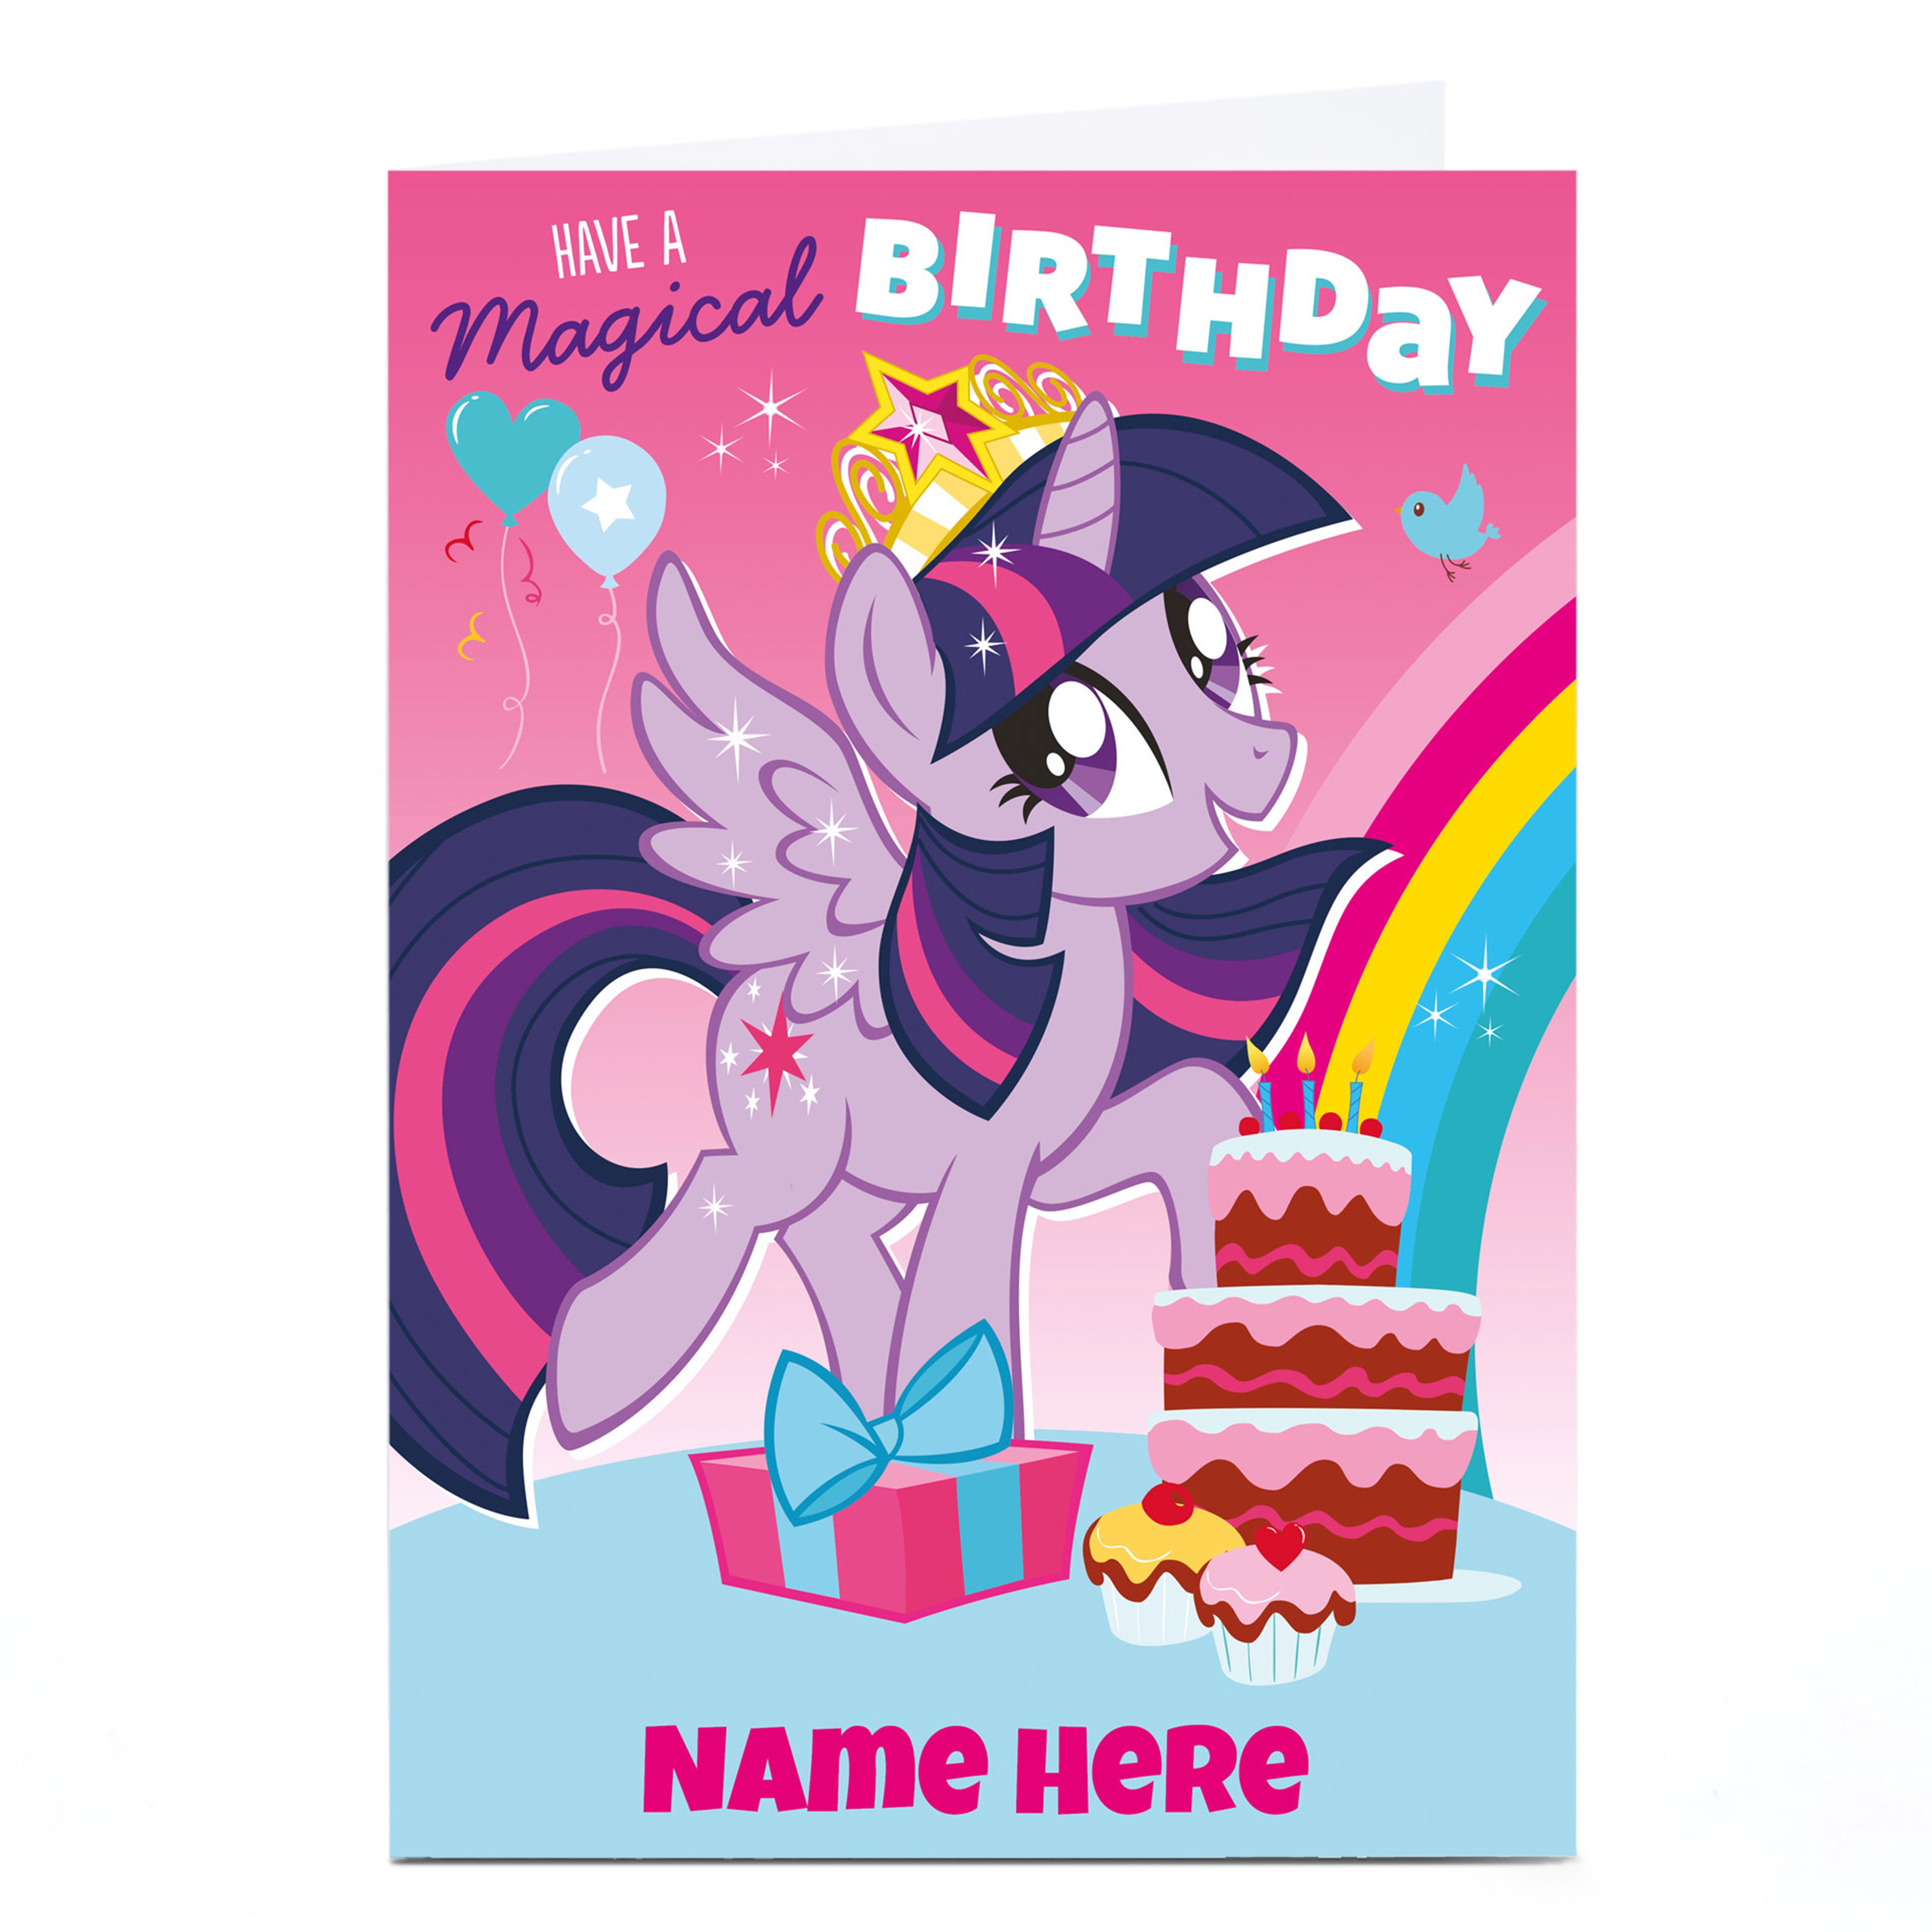 buy-personalised-birthday-card-my-little-pony-for-gbp-2-29-5-49-card-factory-uk